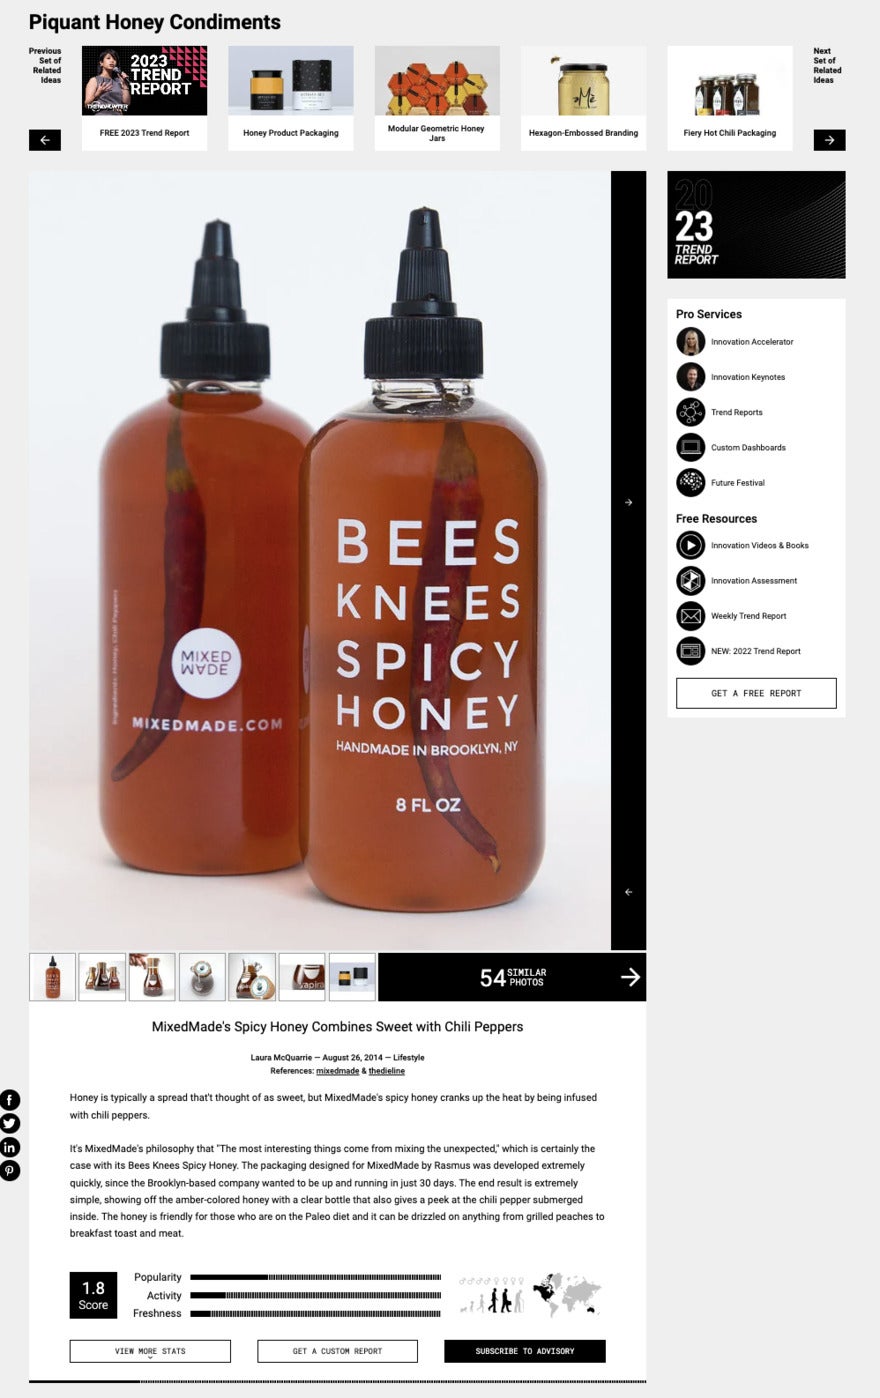 MixedMade's Bees Knees Spicey Honey product page